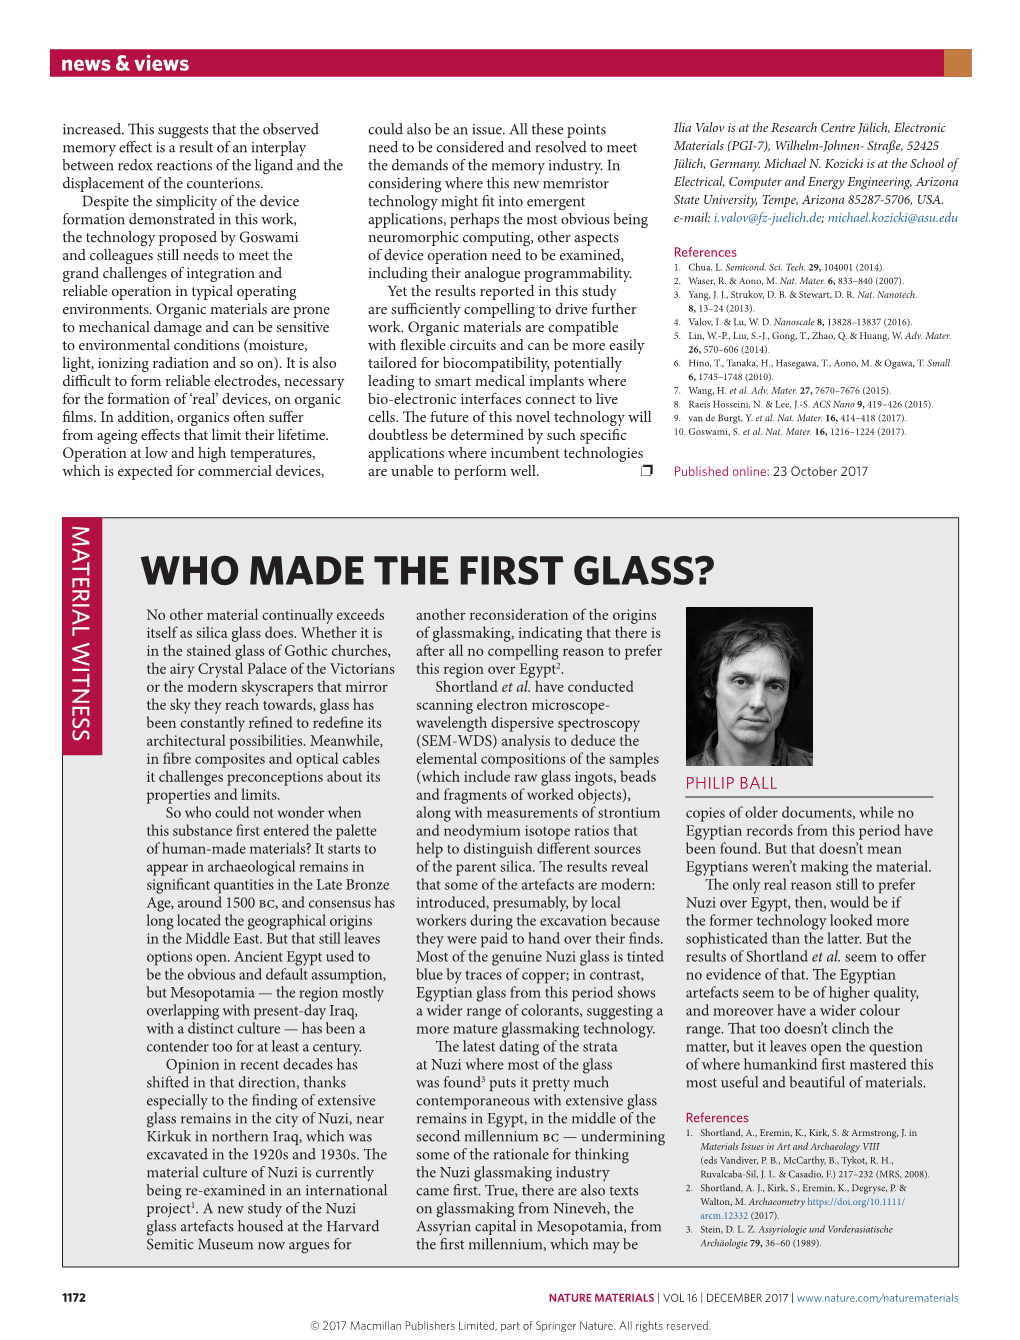 WHO MADE the FIRST GLASS? No Other Material Continually Exceeds Another Reconsideration of the Origins Itself As Silica Glass Does